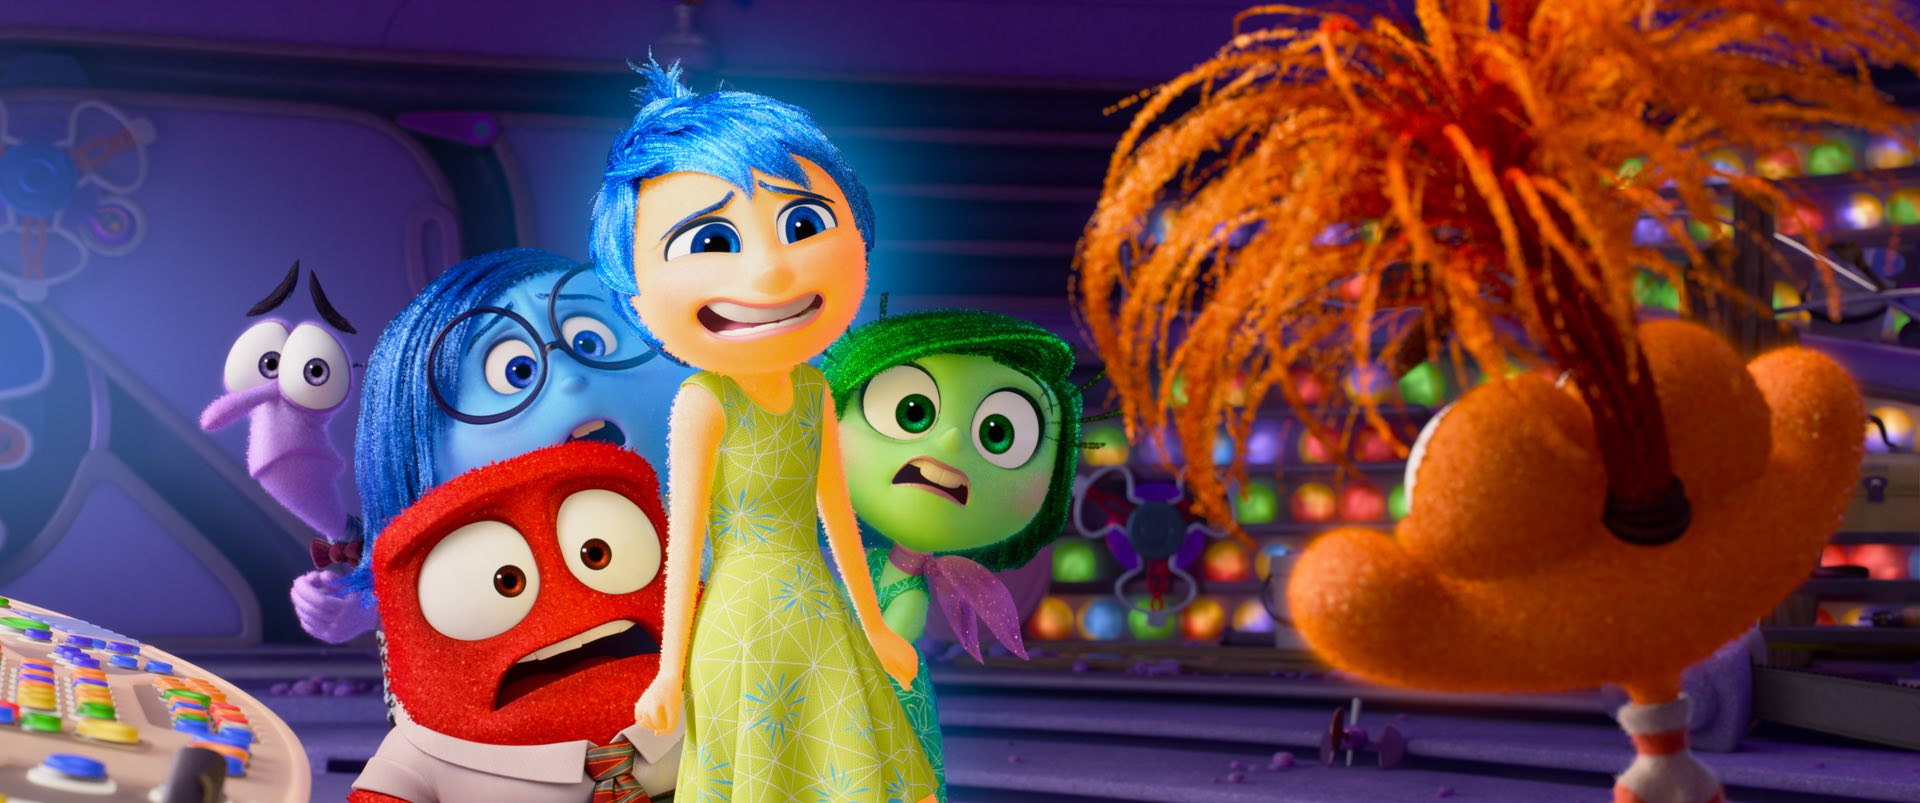 Inside out 2 movie Review